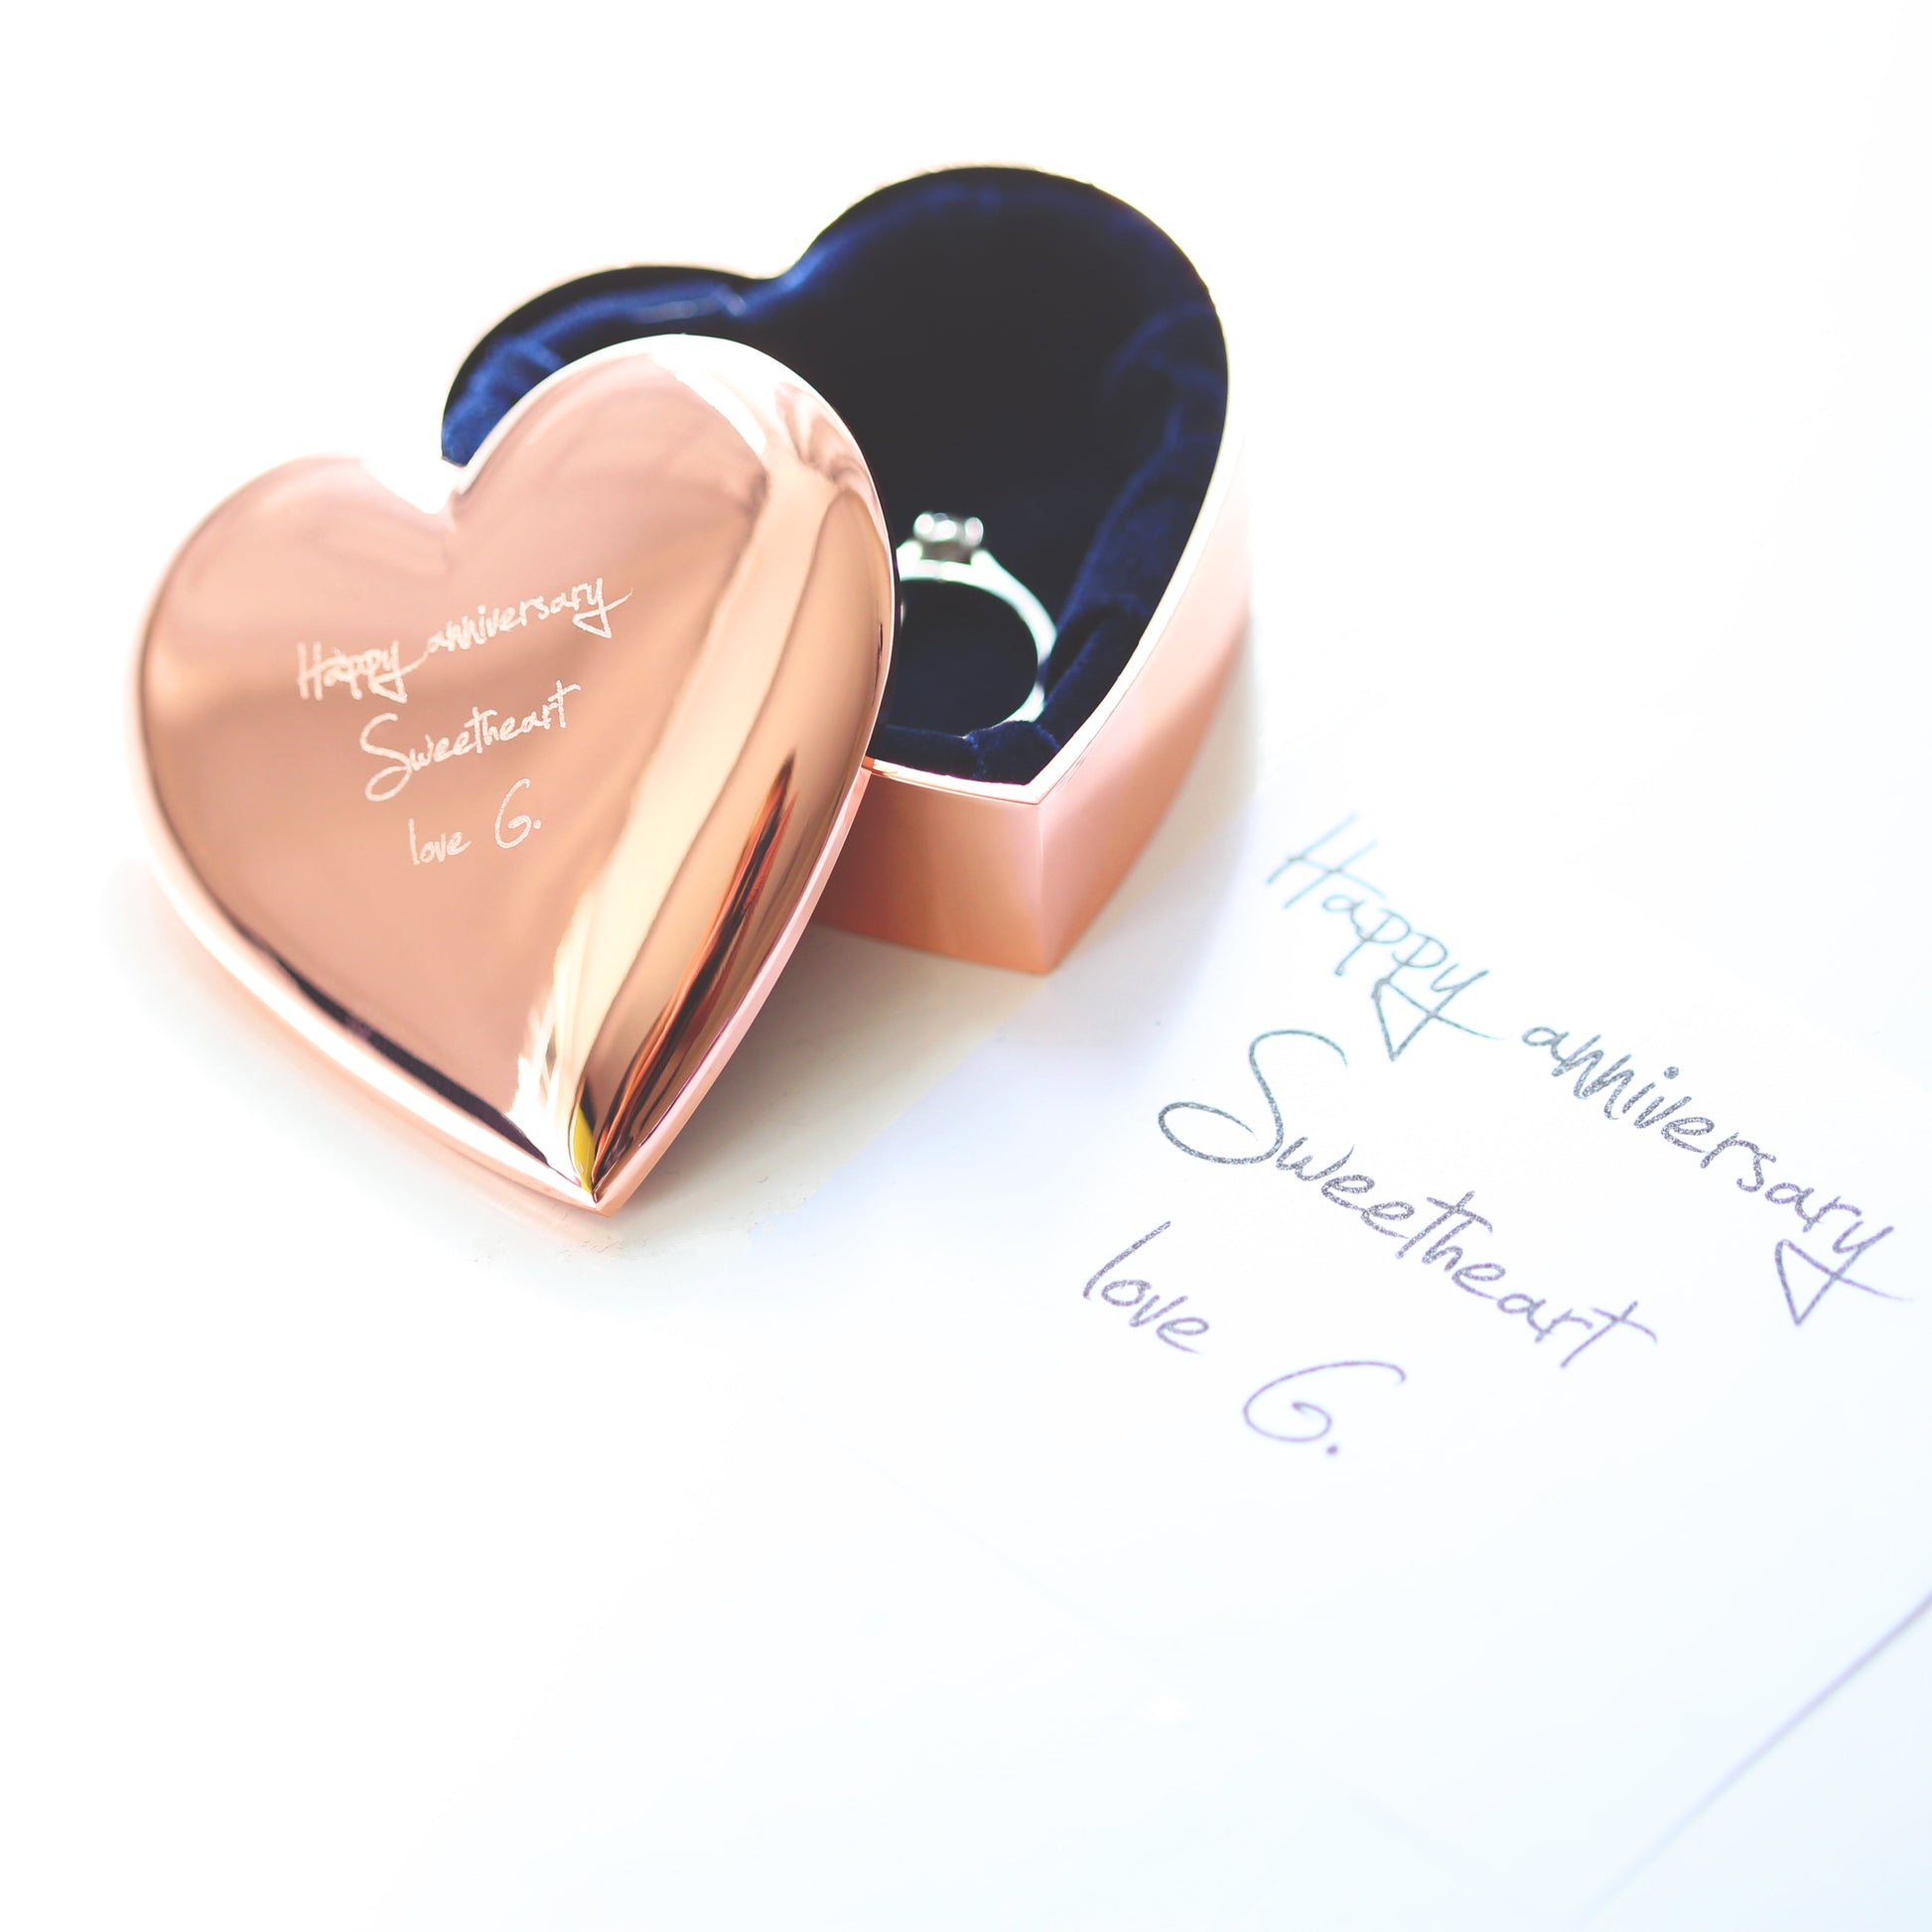 Personalized Trinket Boxes - Rose Gold Heart Trinket Box With Own Handwriting 